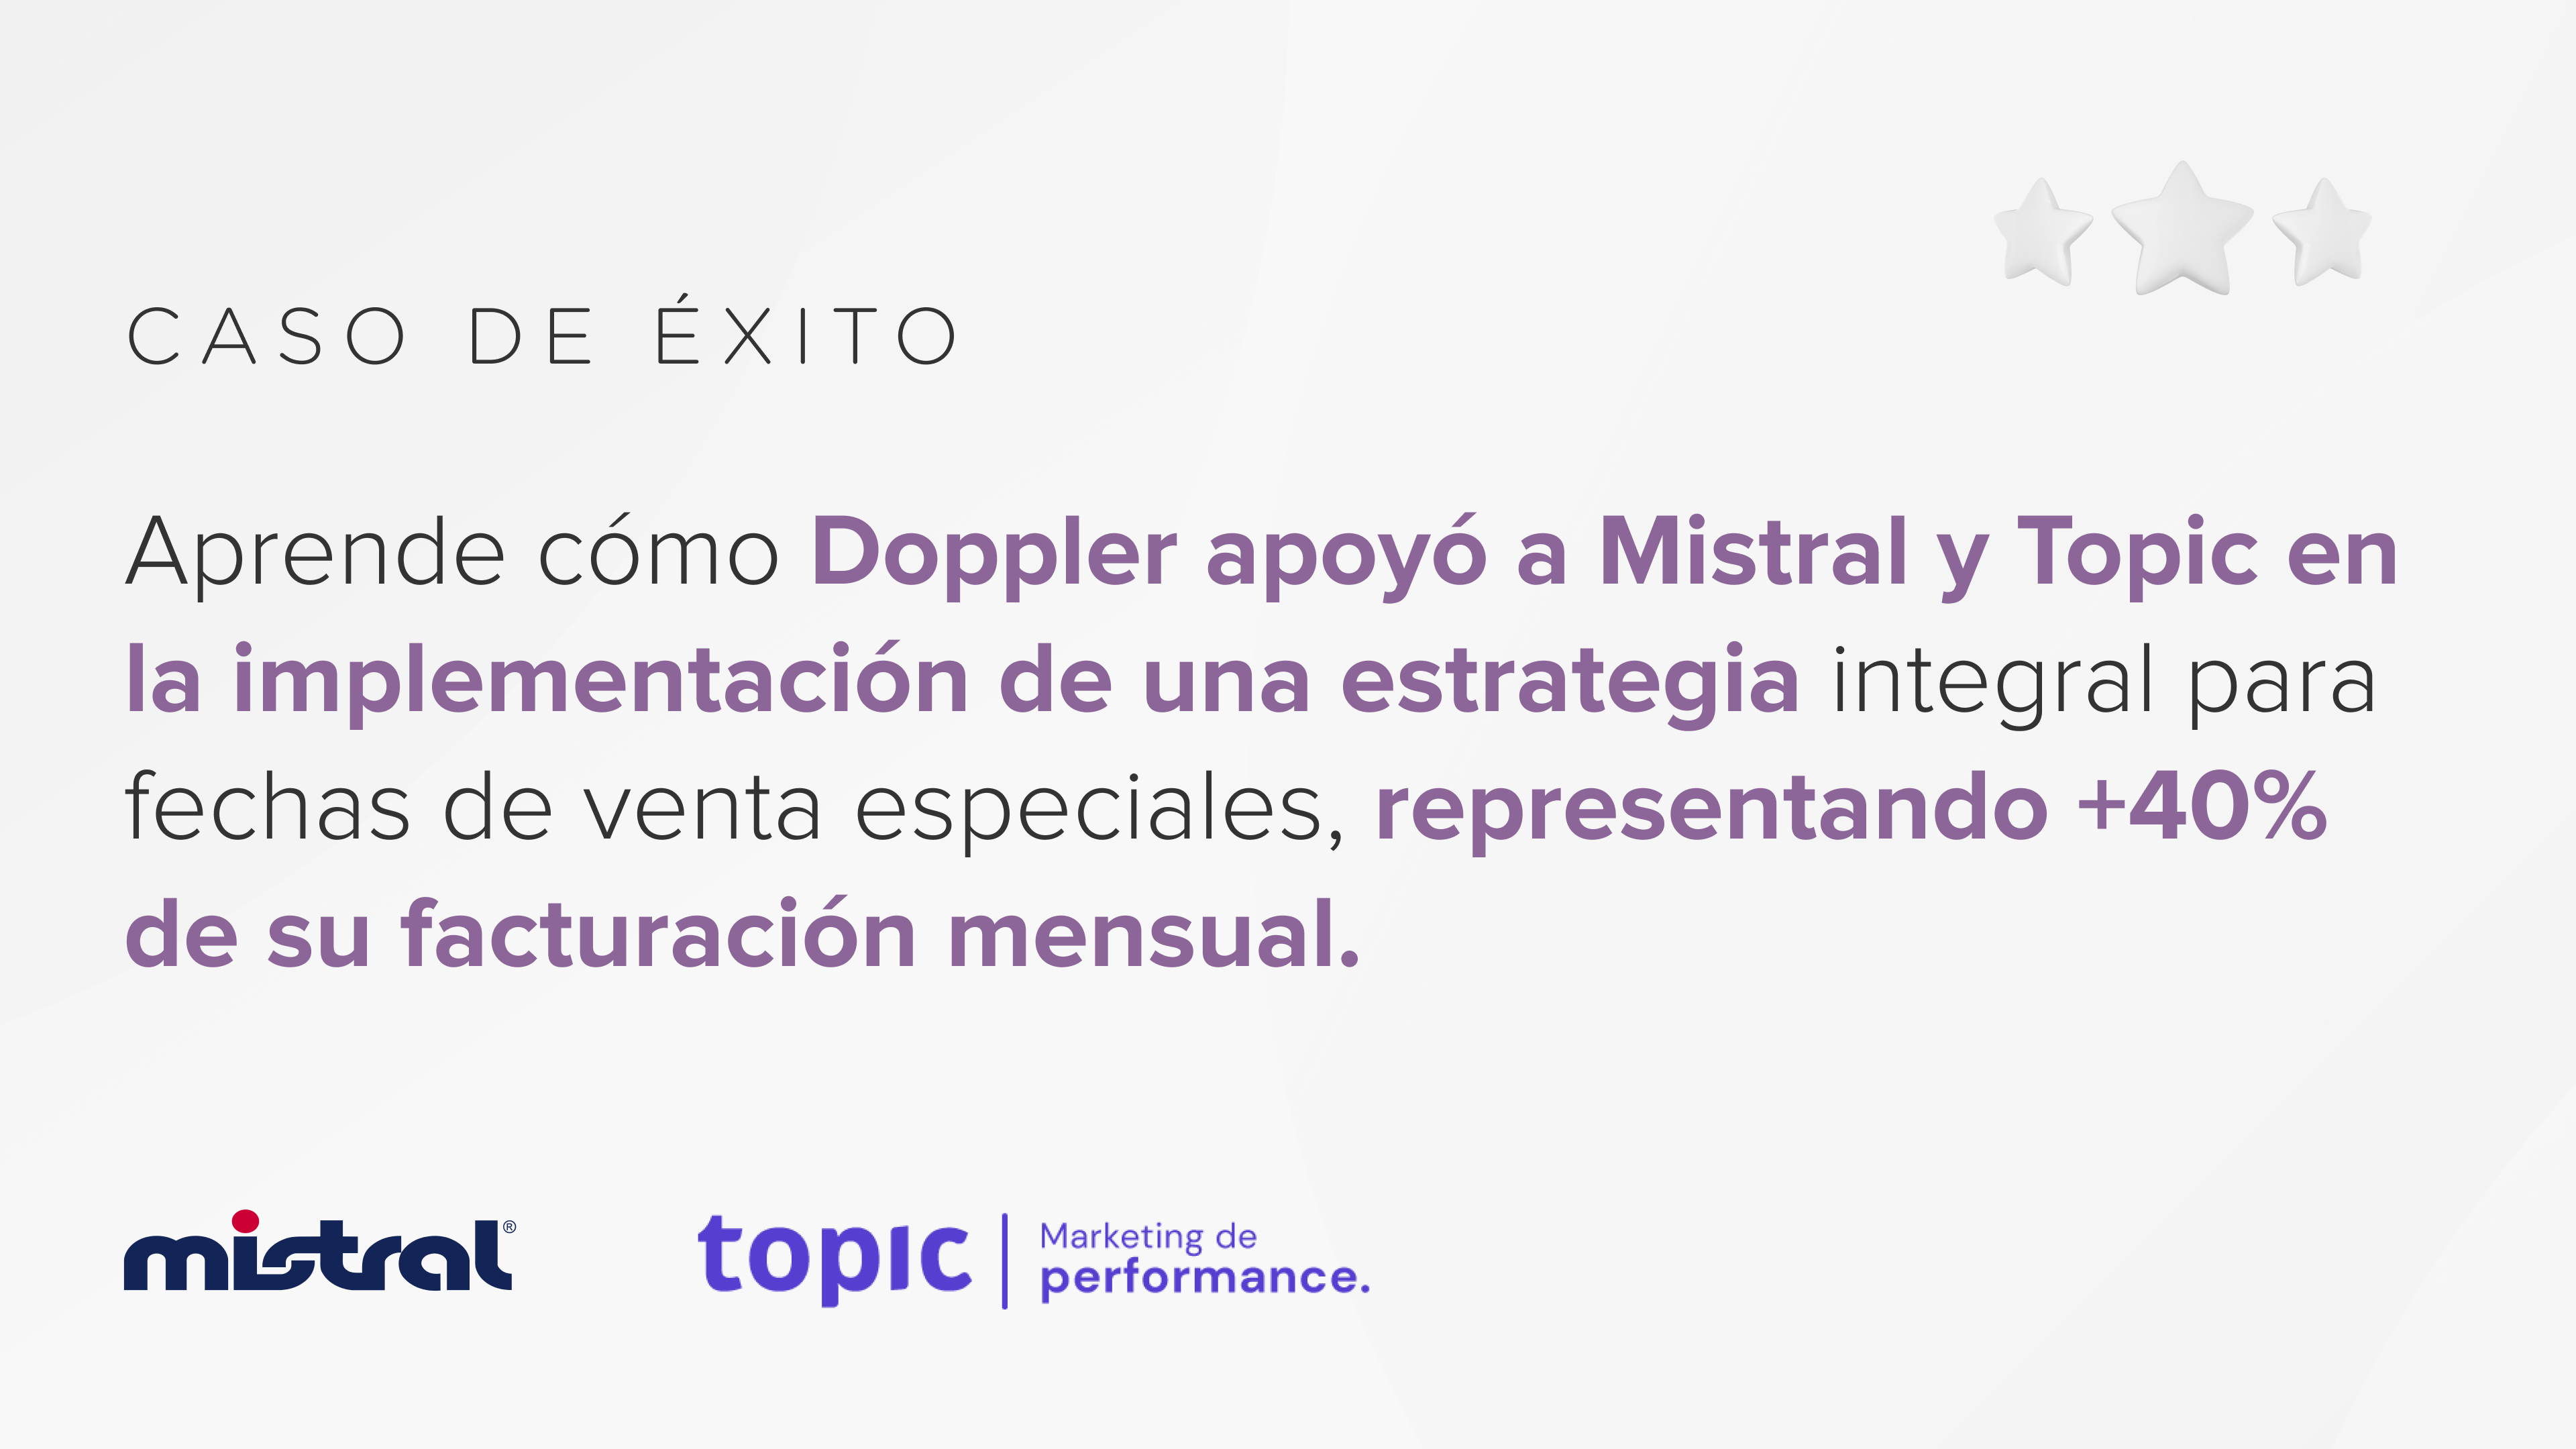 Topic y Mistral